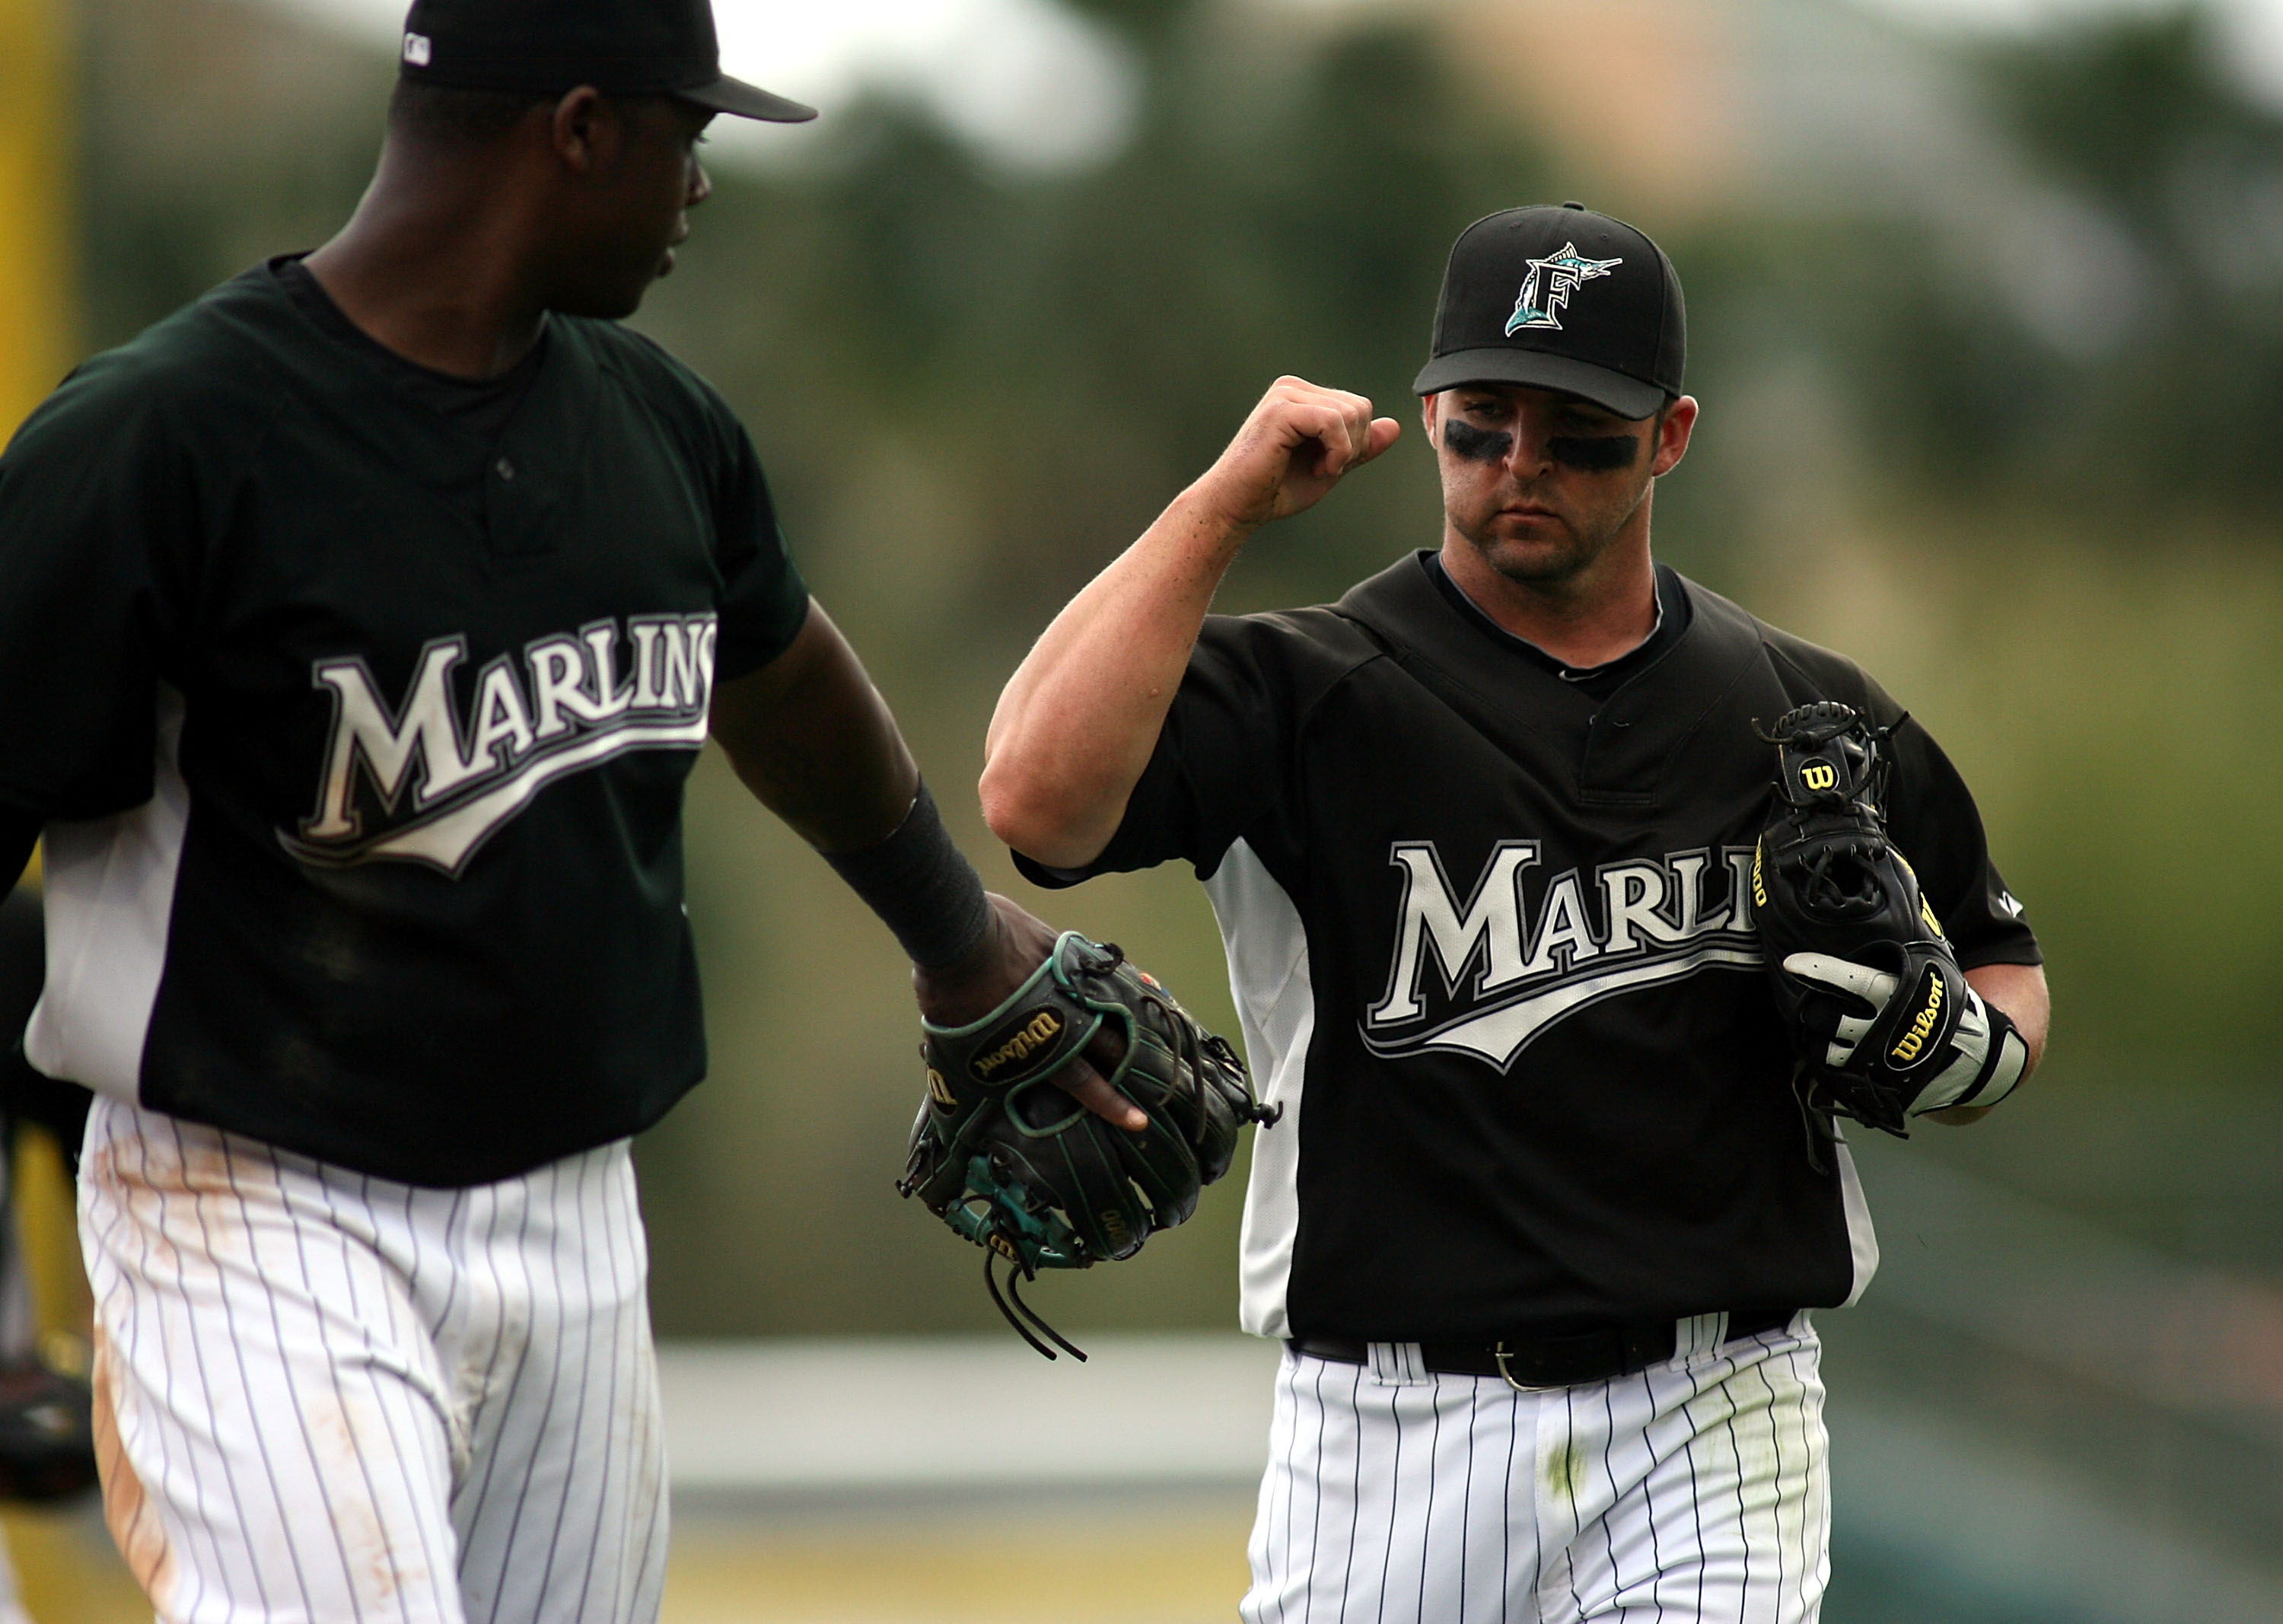 JUPITER, FL - MARCH 28:  Hanley Ramirez #2 and Dan Uggla #6 of the Florida Marlins come off the field  against the Houston Astros on March 28, 2010 at Roger Dean Stadium in Jupiter, Florida.  (Photo by Marc Serota/Getty Images)